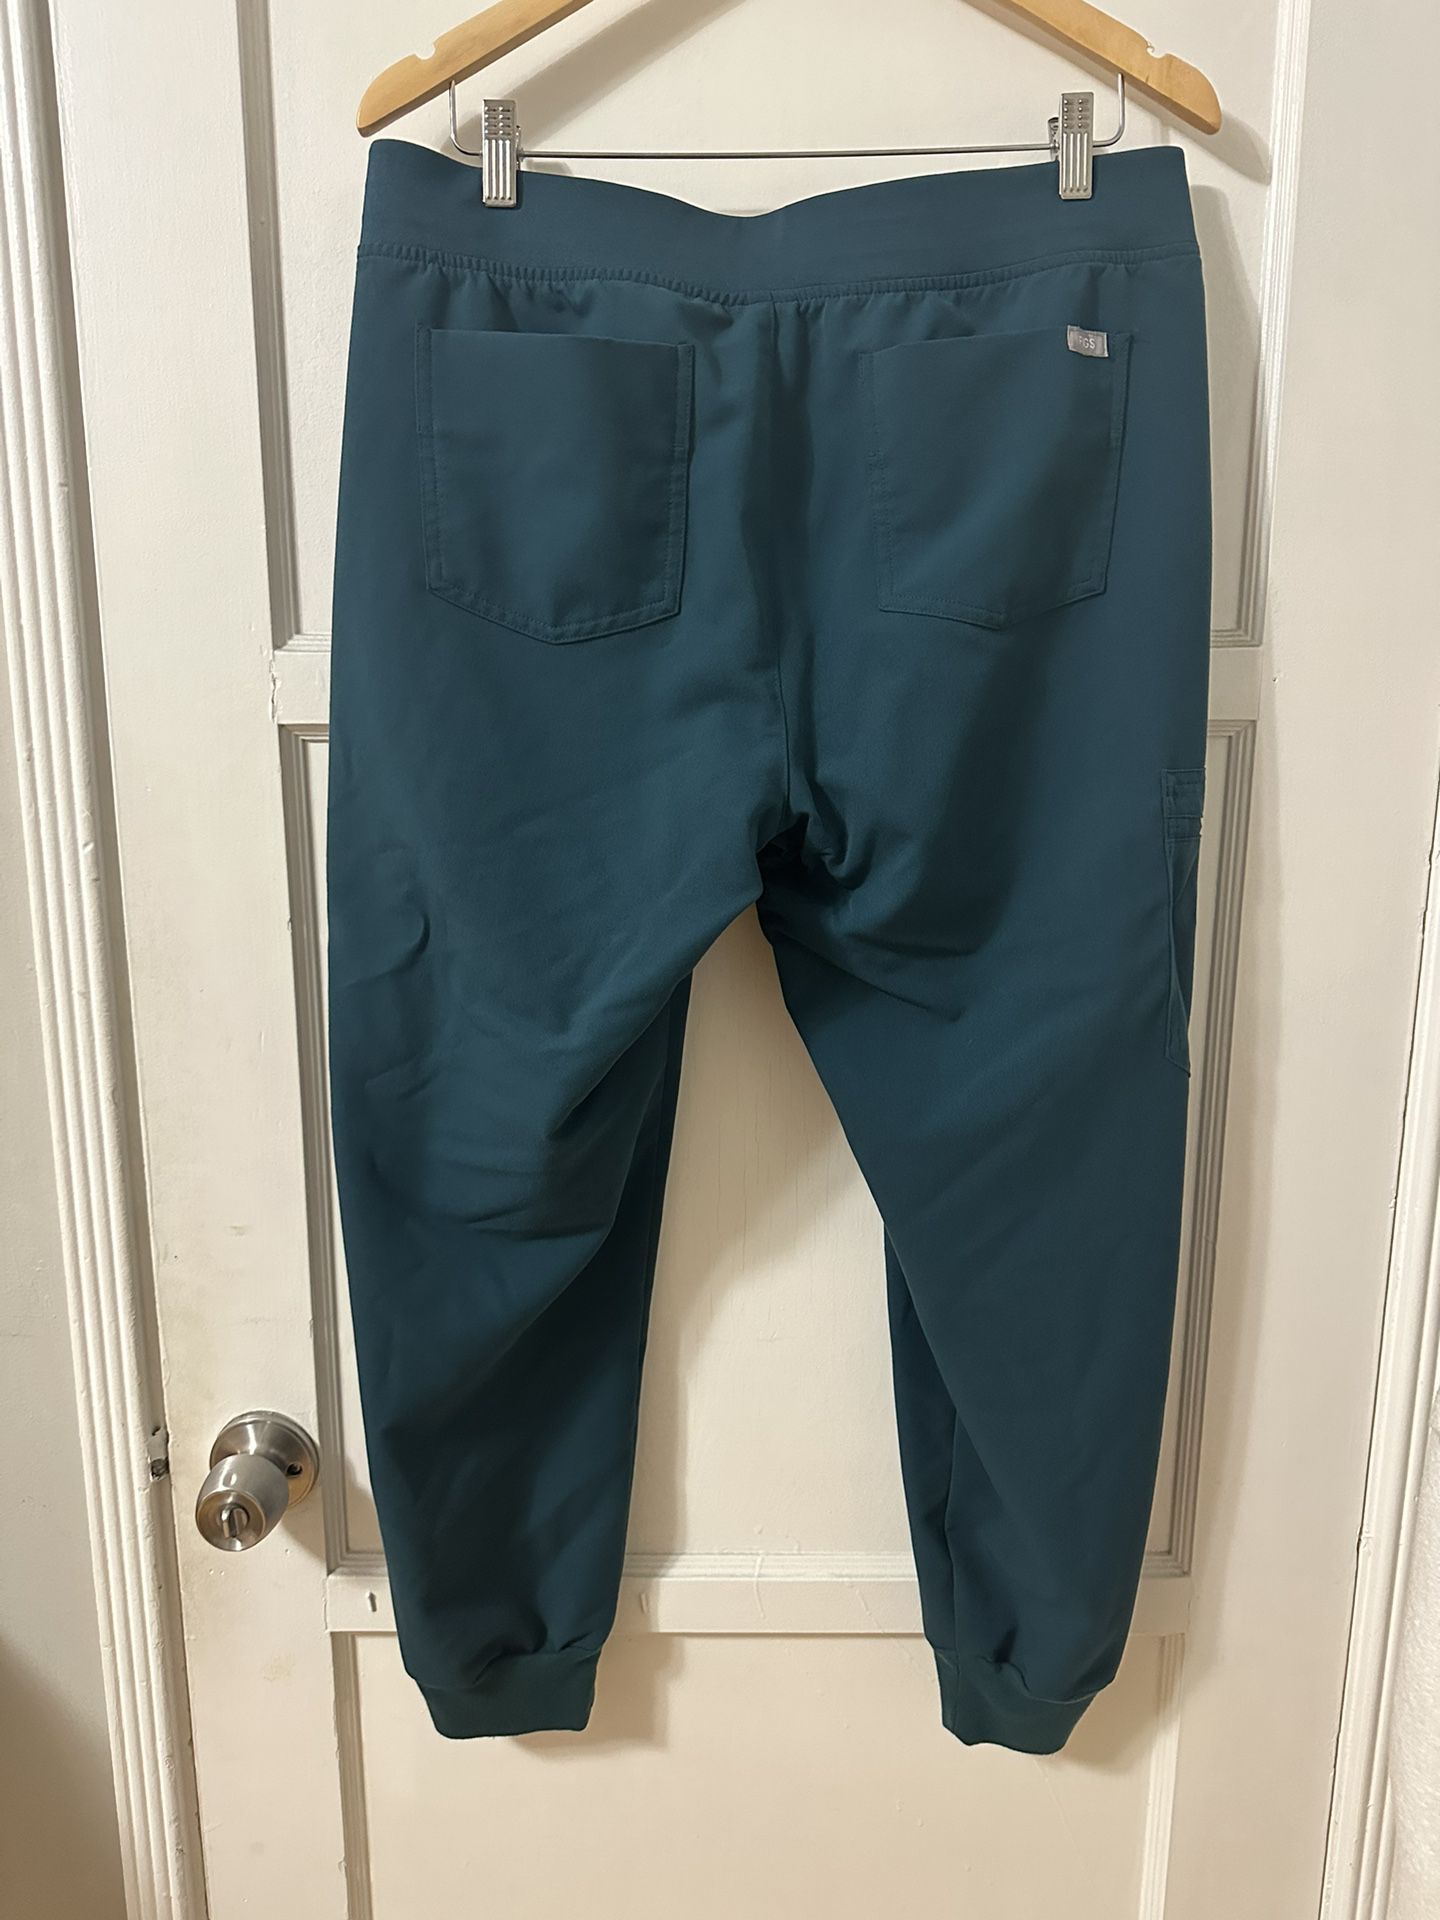 NEW FIGS Zamora Joggers & Catarina Top for Sale in Paramount, CA - OfferUp